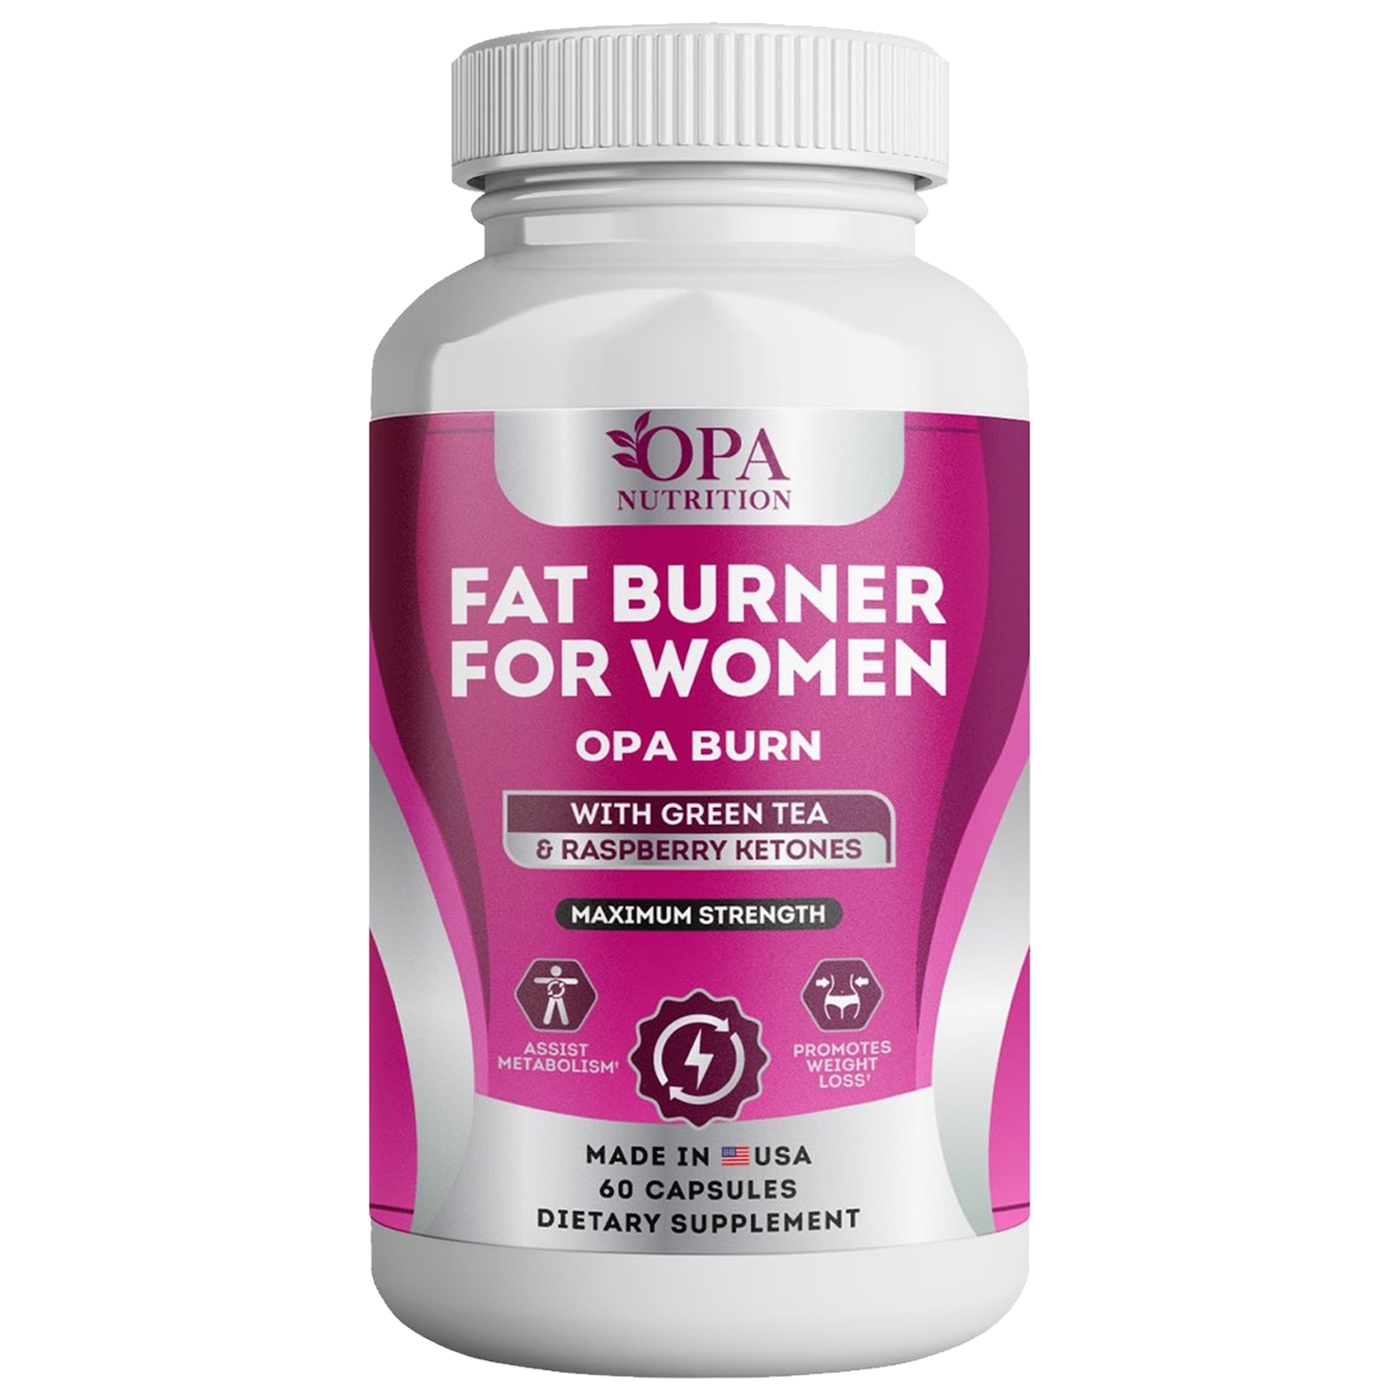 Green Tea Fat Burner for Women with Raspberry Ketone - 60 Ct. Front ingredients